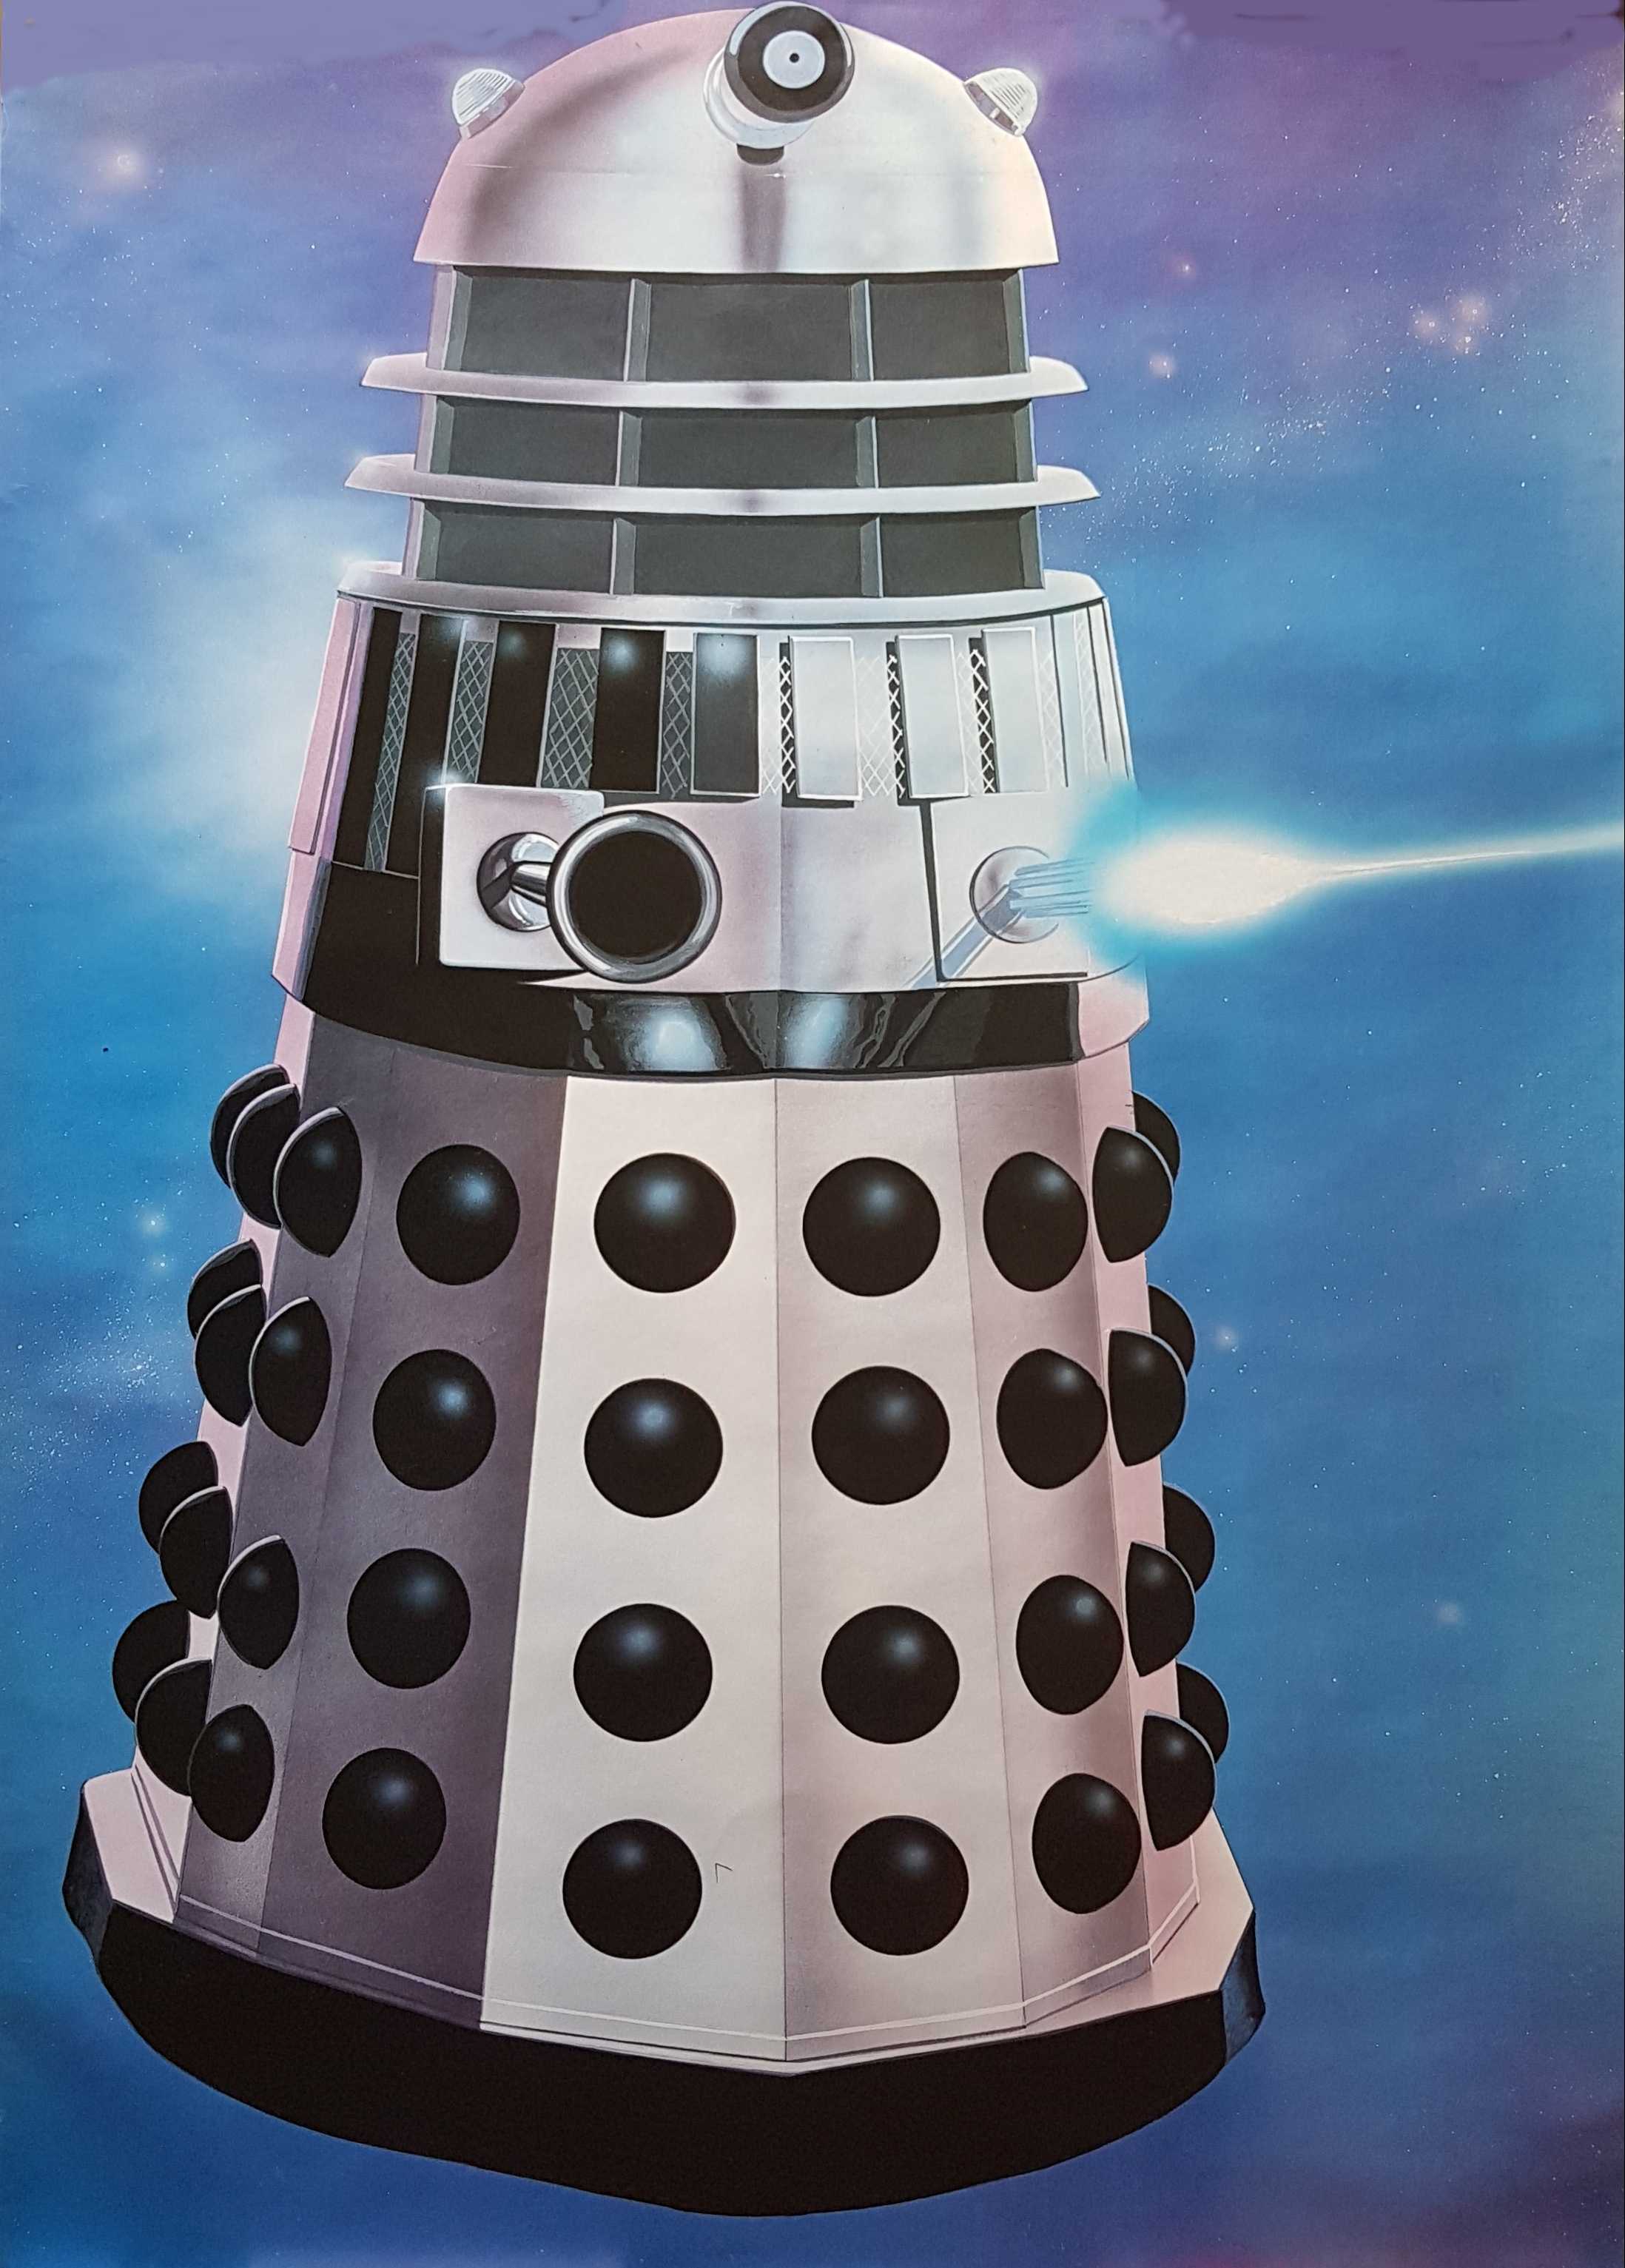 Picture of Poster-DW-Dalek Doctor Who - Dalek by artist Unknown from the BBC posters - Records and Tapes library